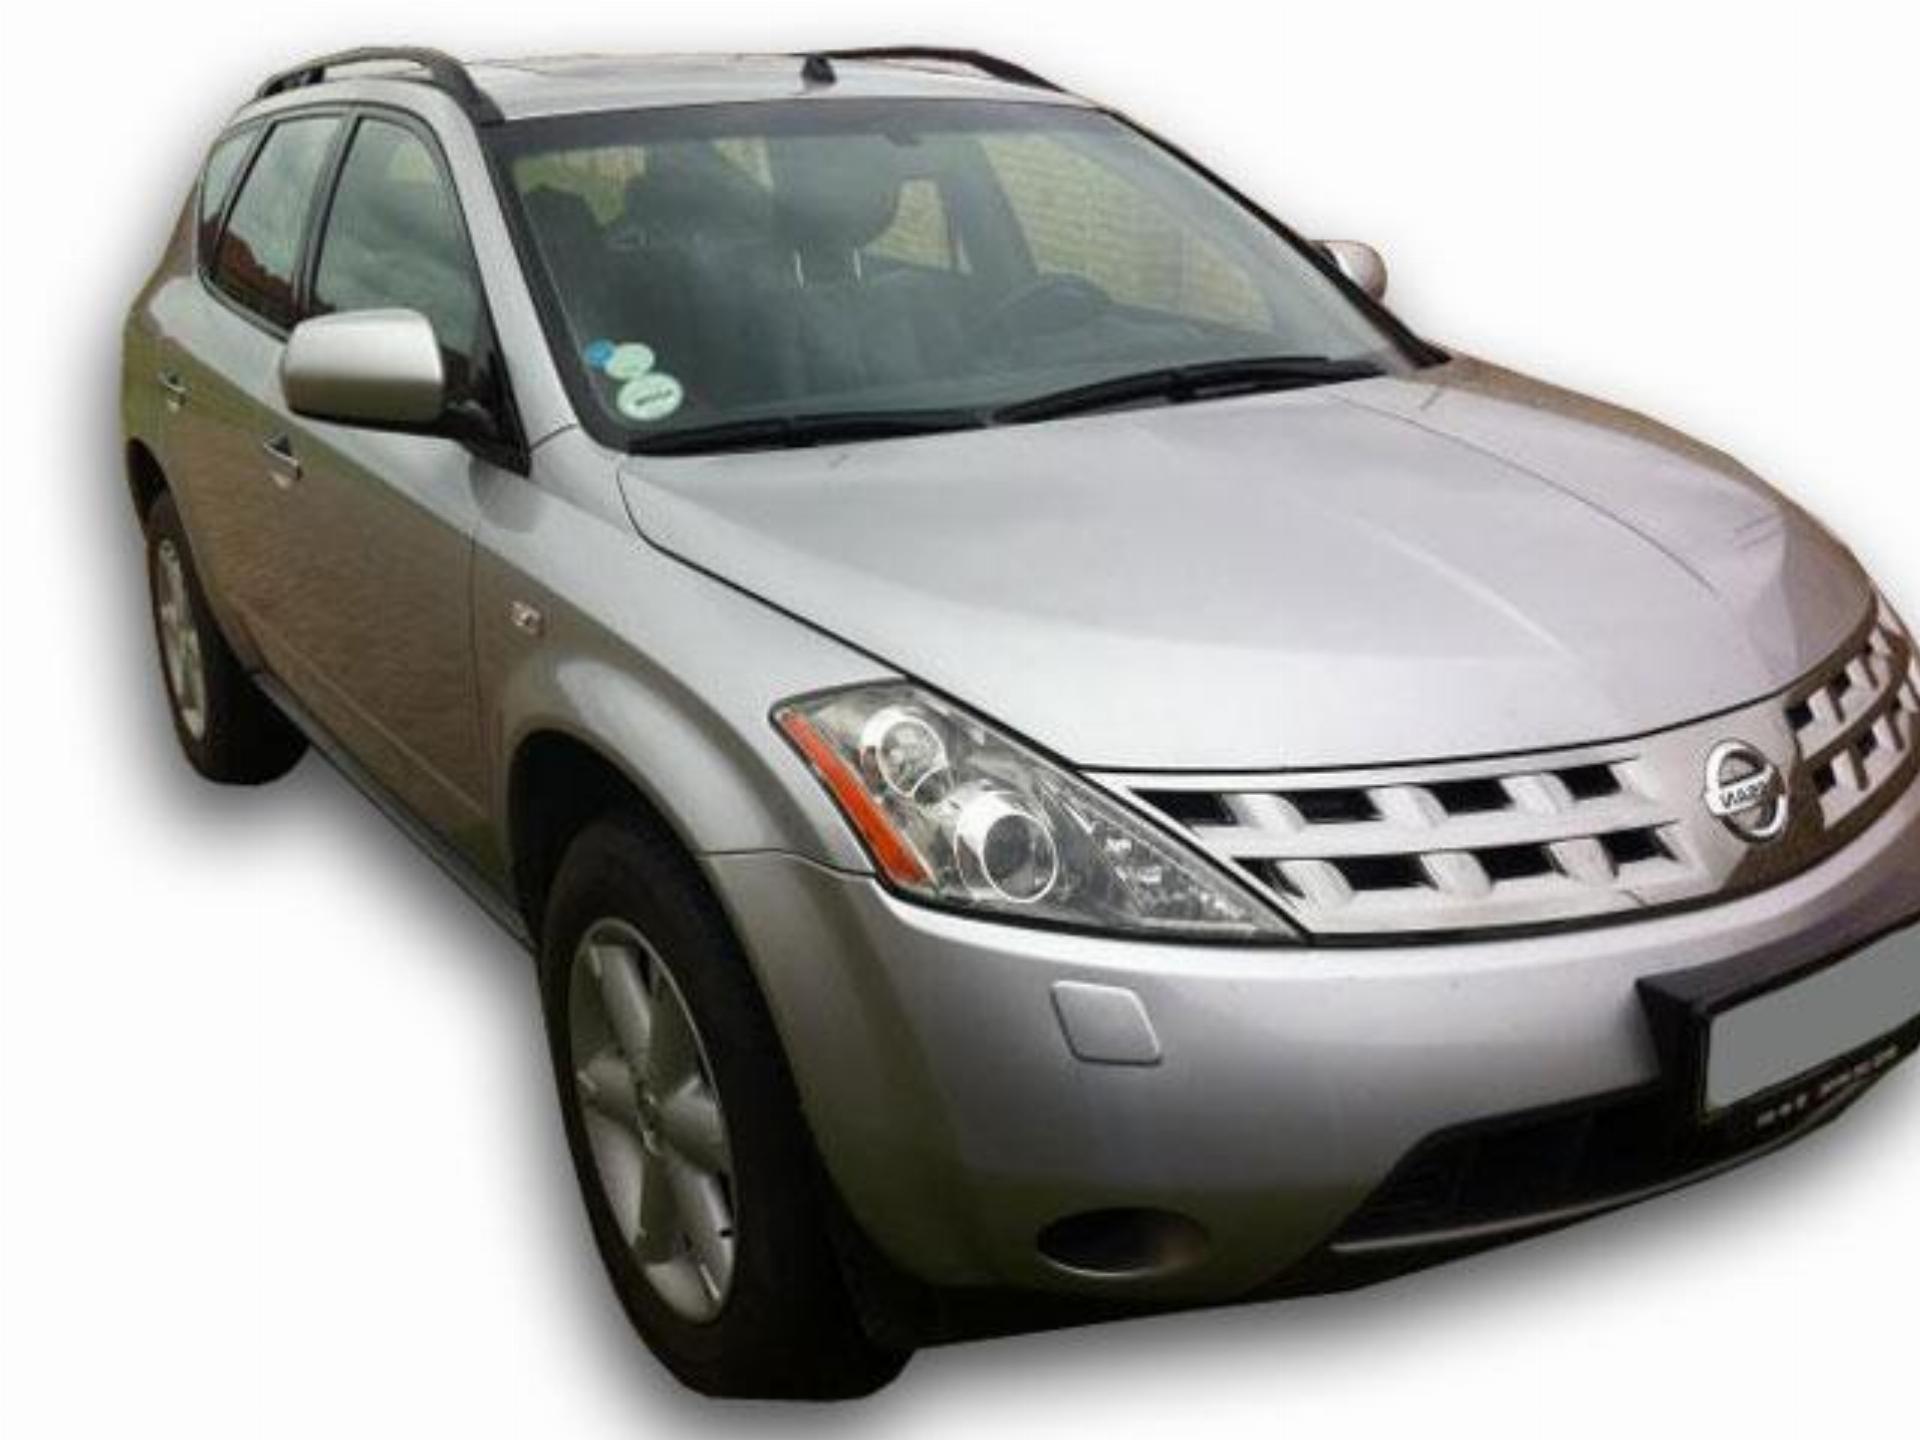 Used Nissan Murano 3.5 V6 2008 on auction PV1001737